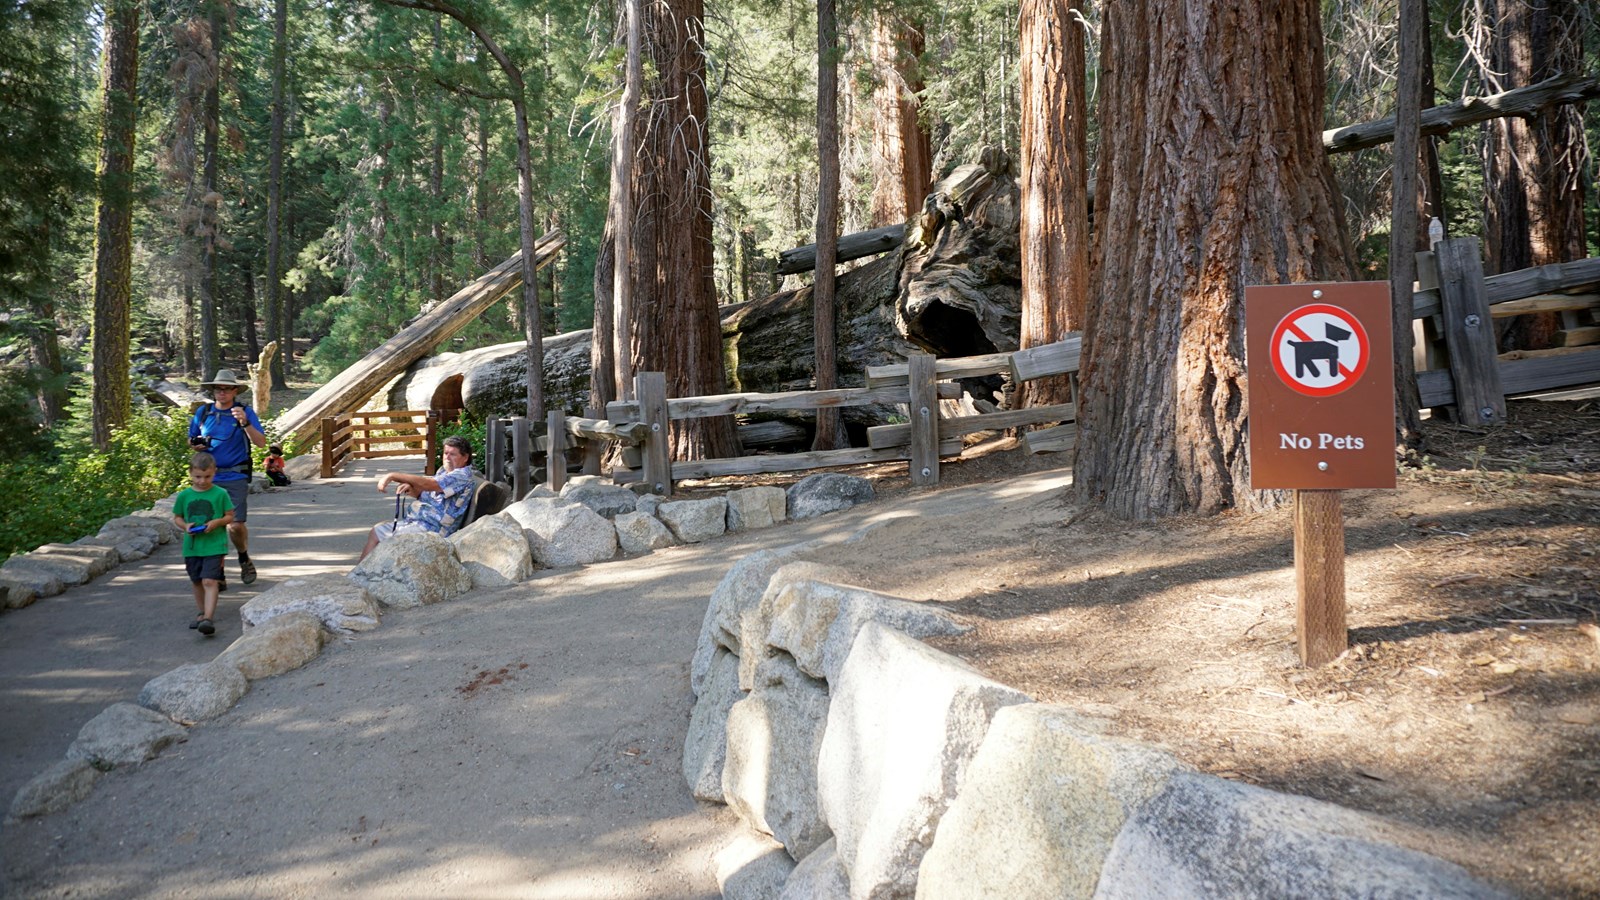 An asphalt path is flanked by rock walls and tall trees